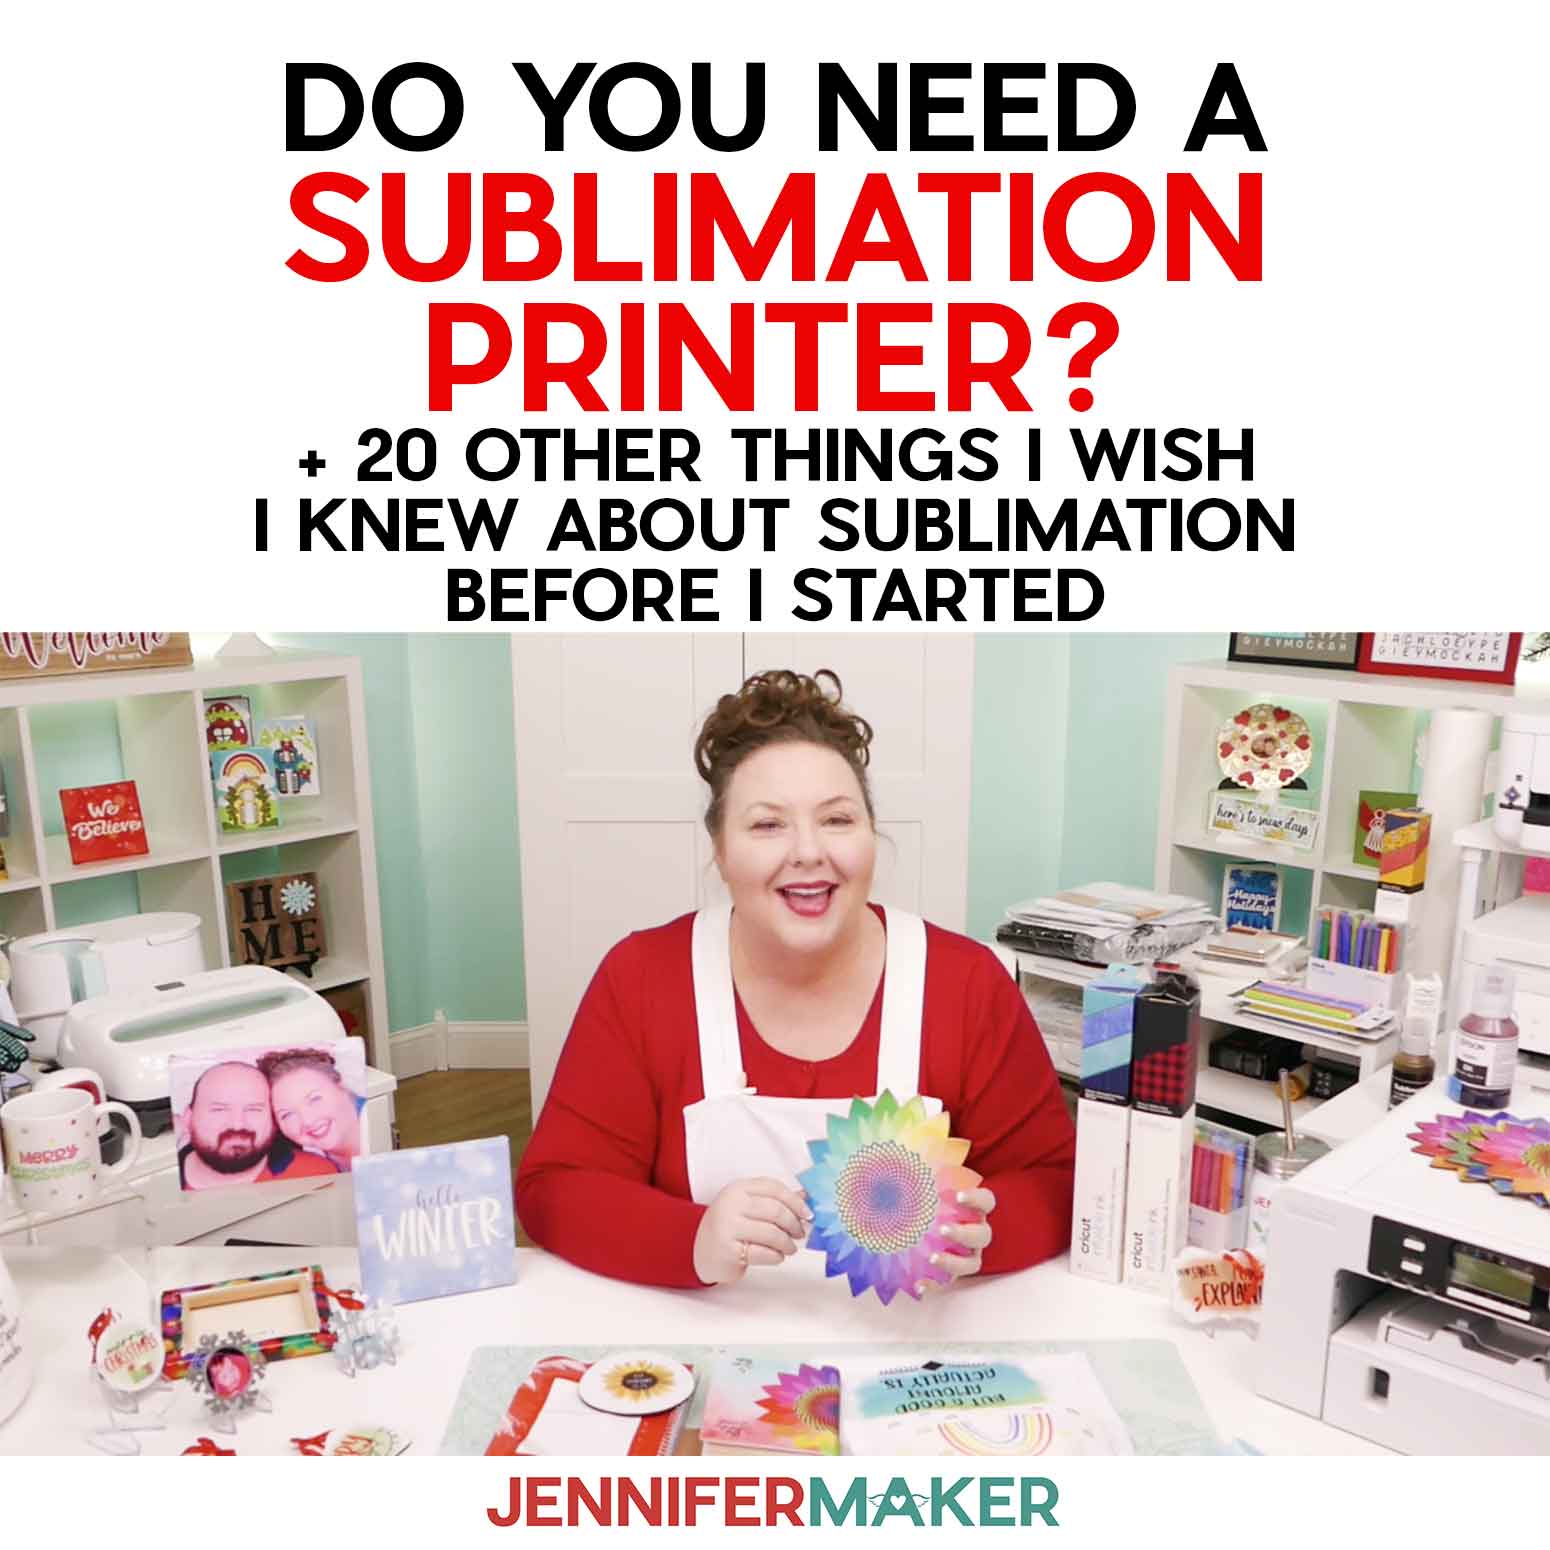 Do You Need a Sublimation Printer? 21 Things I Wish I Knew Before I Started Sublimation!